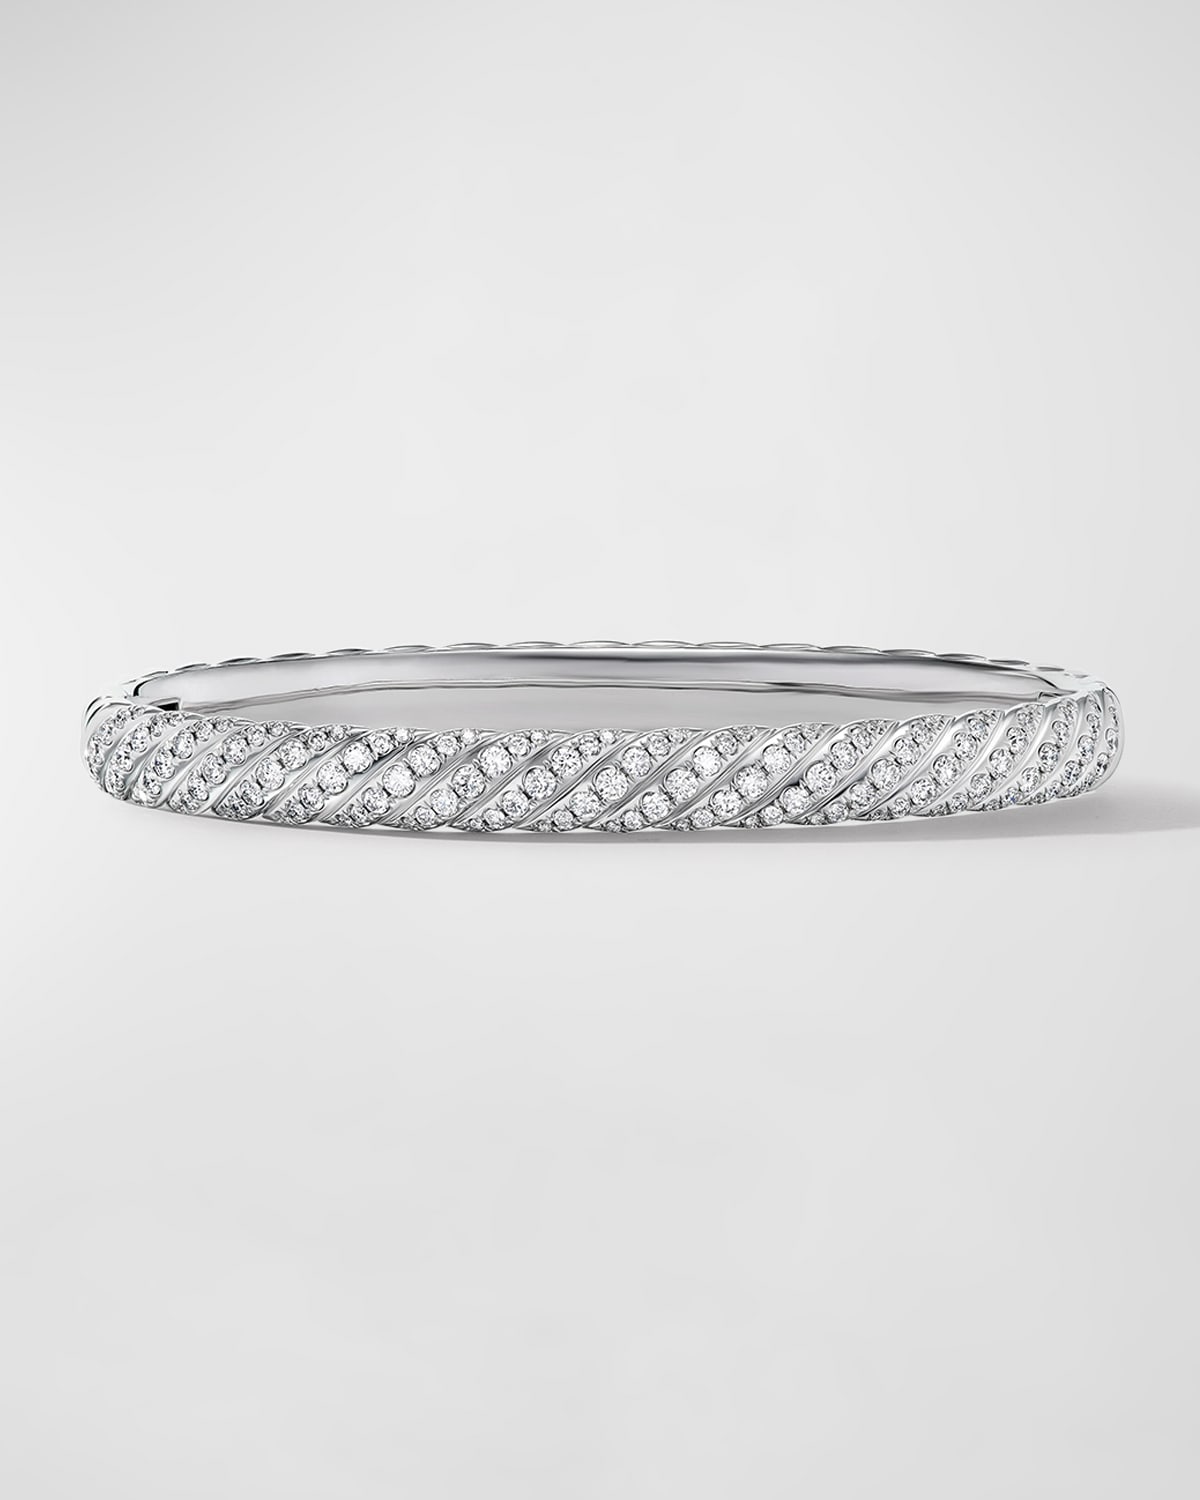 David Yurman Sculpted Cable Bracelet with Diamonds in 18K White Gold, 6mm, Size S